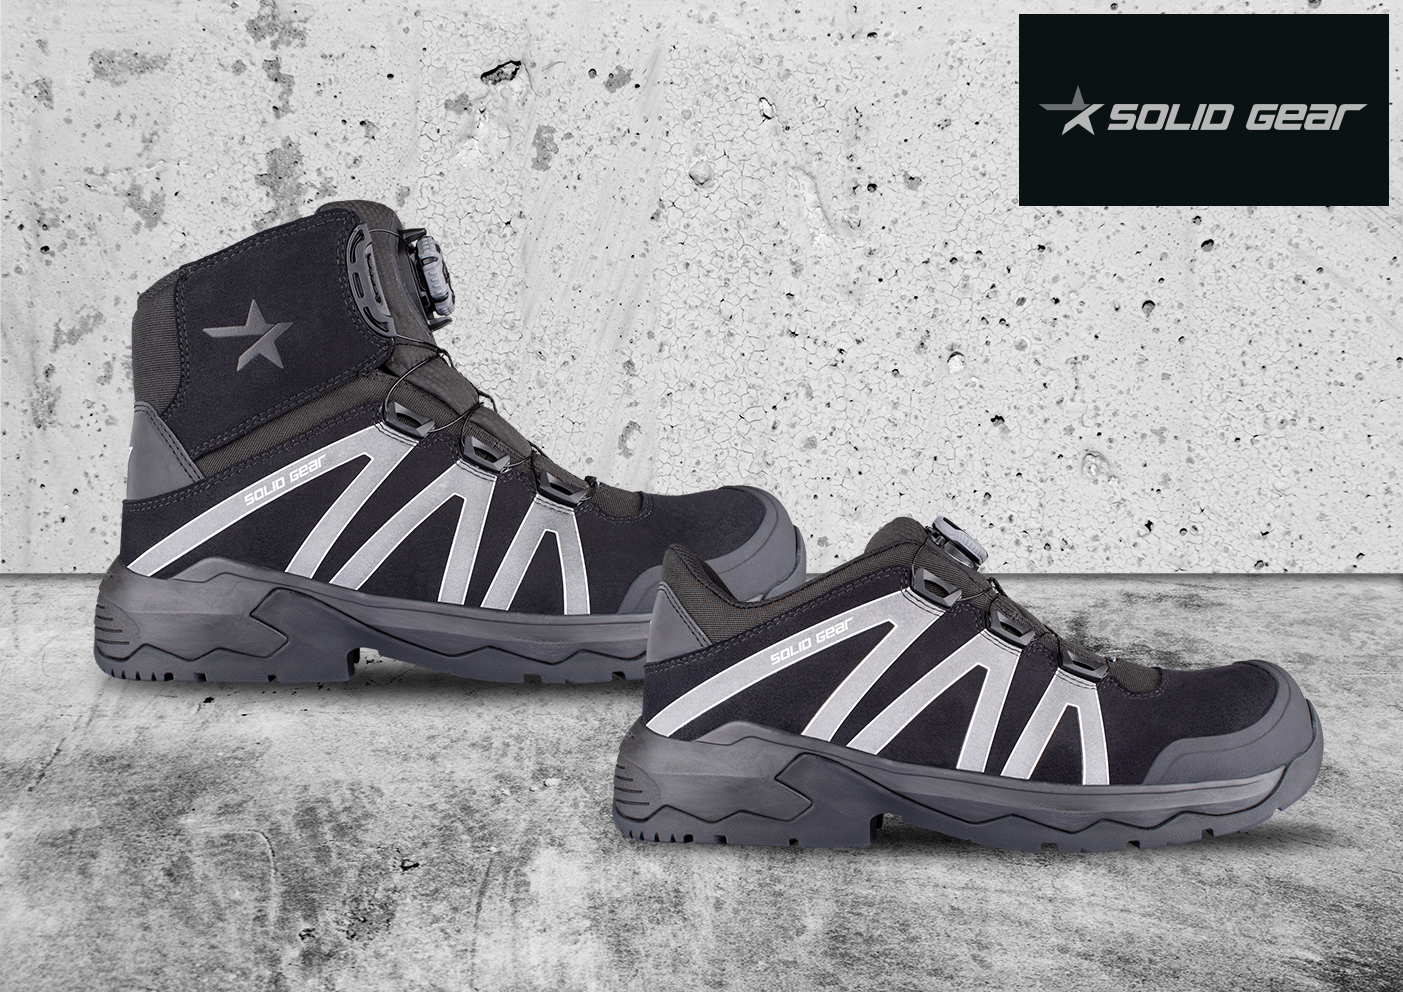 NEW from Solid Gear – the Onyx Safety Shoes and Boots.